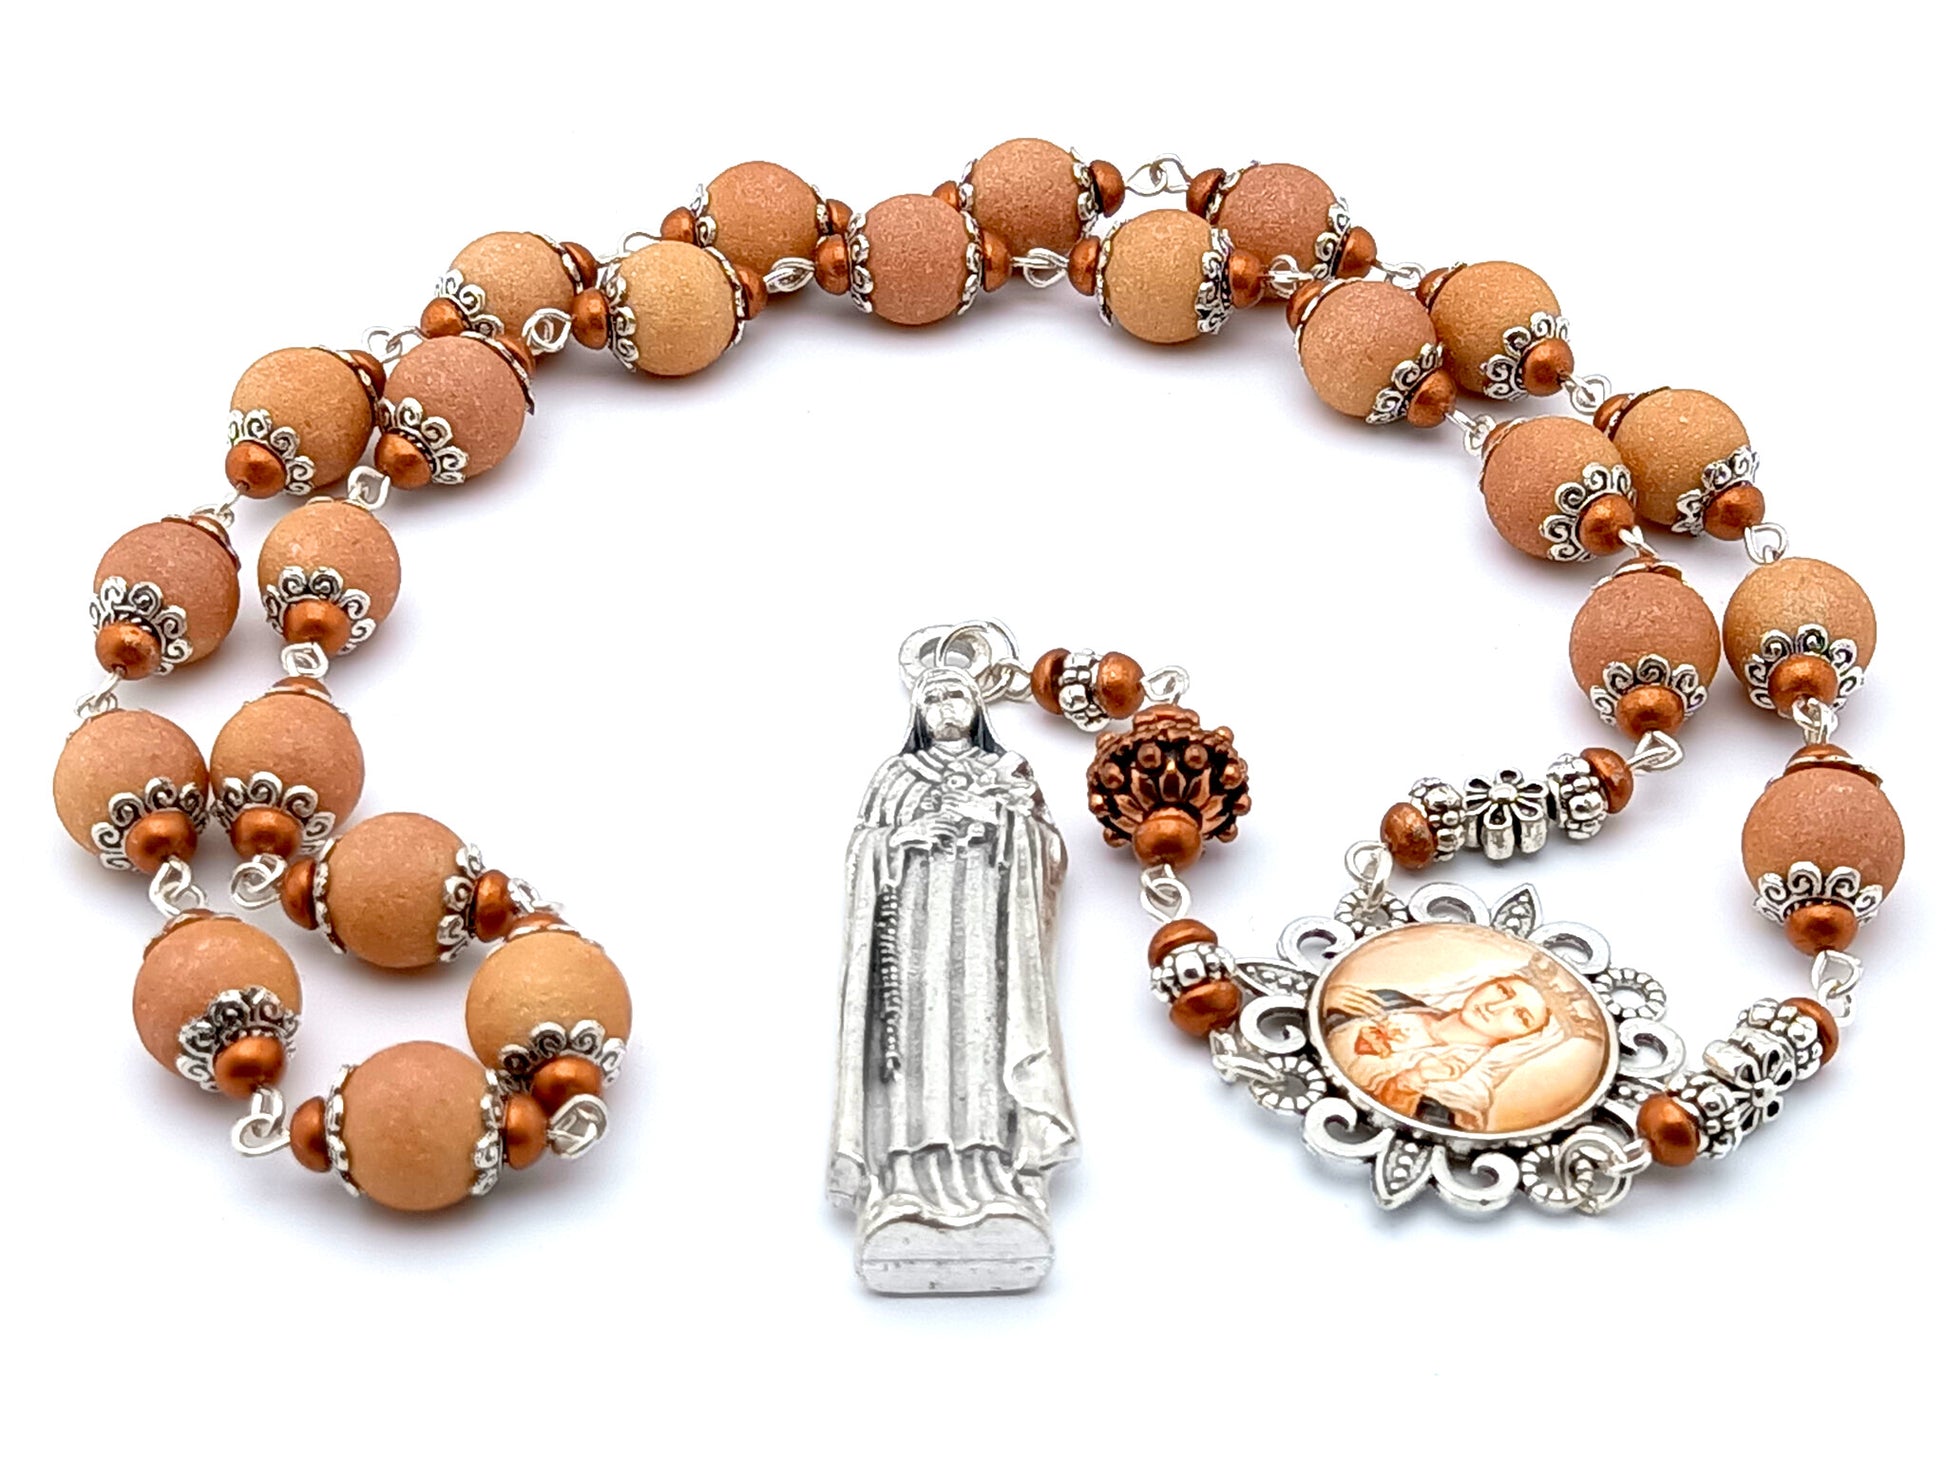 Saint Therese of Lisieux unique rosary beads prayer chaplet with buff textured glass beads, silver picture centre medal and statue end medal.